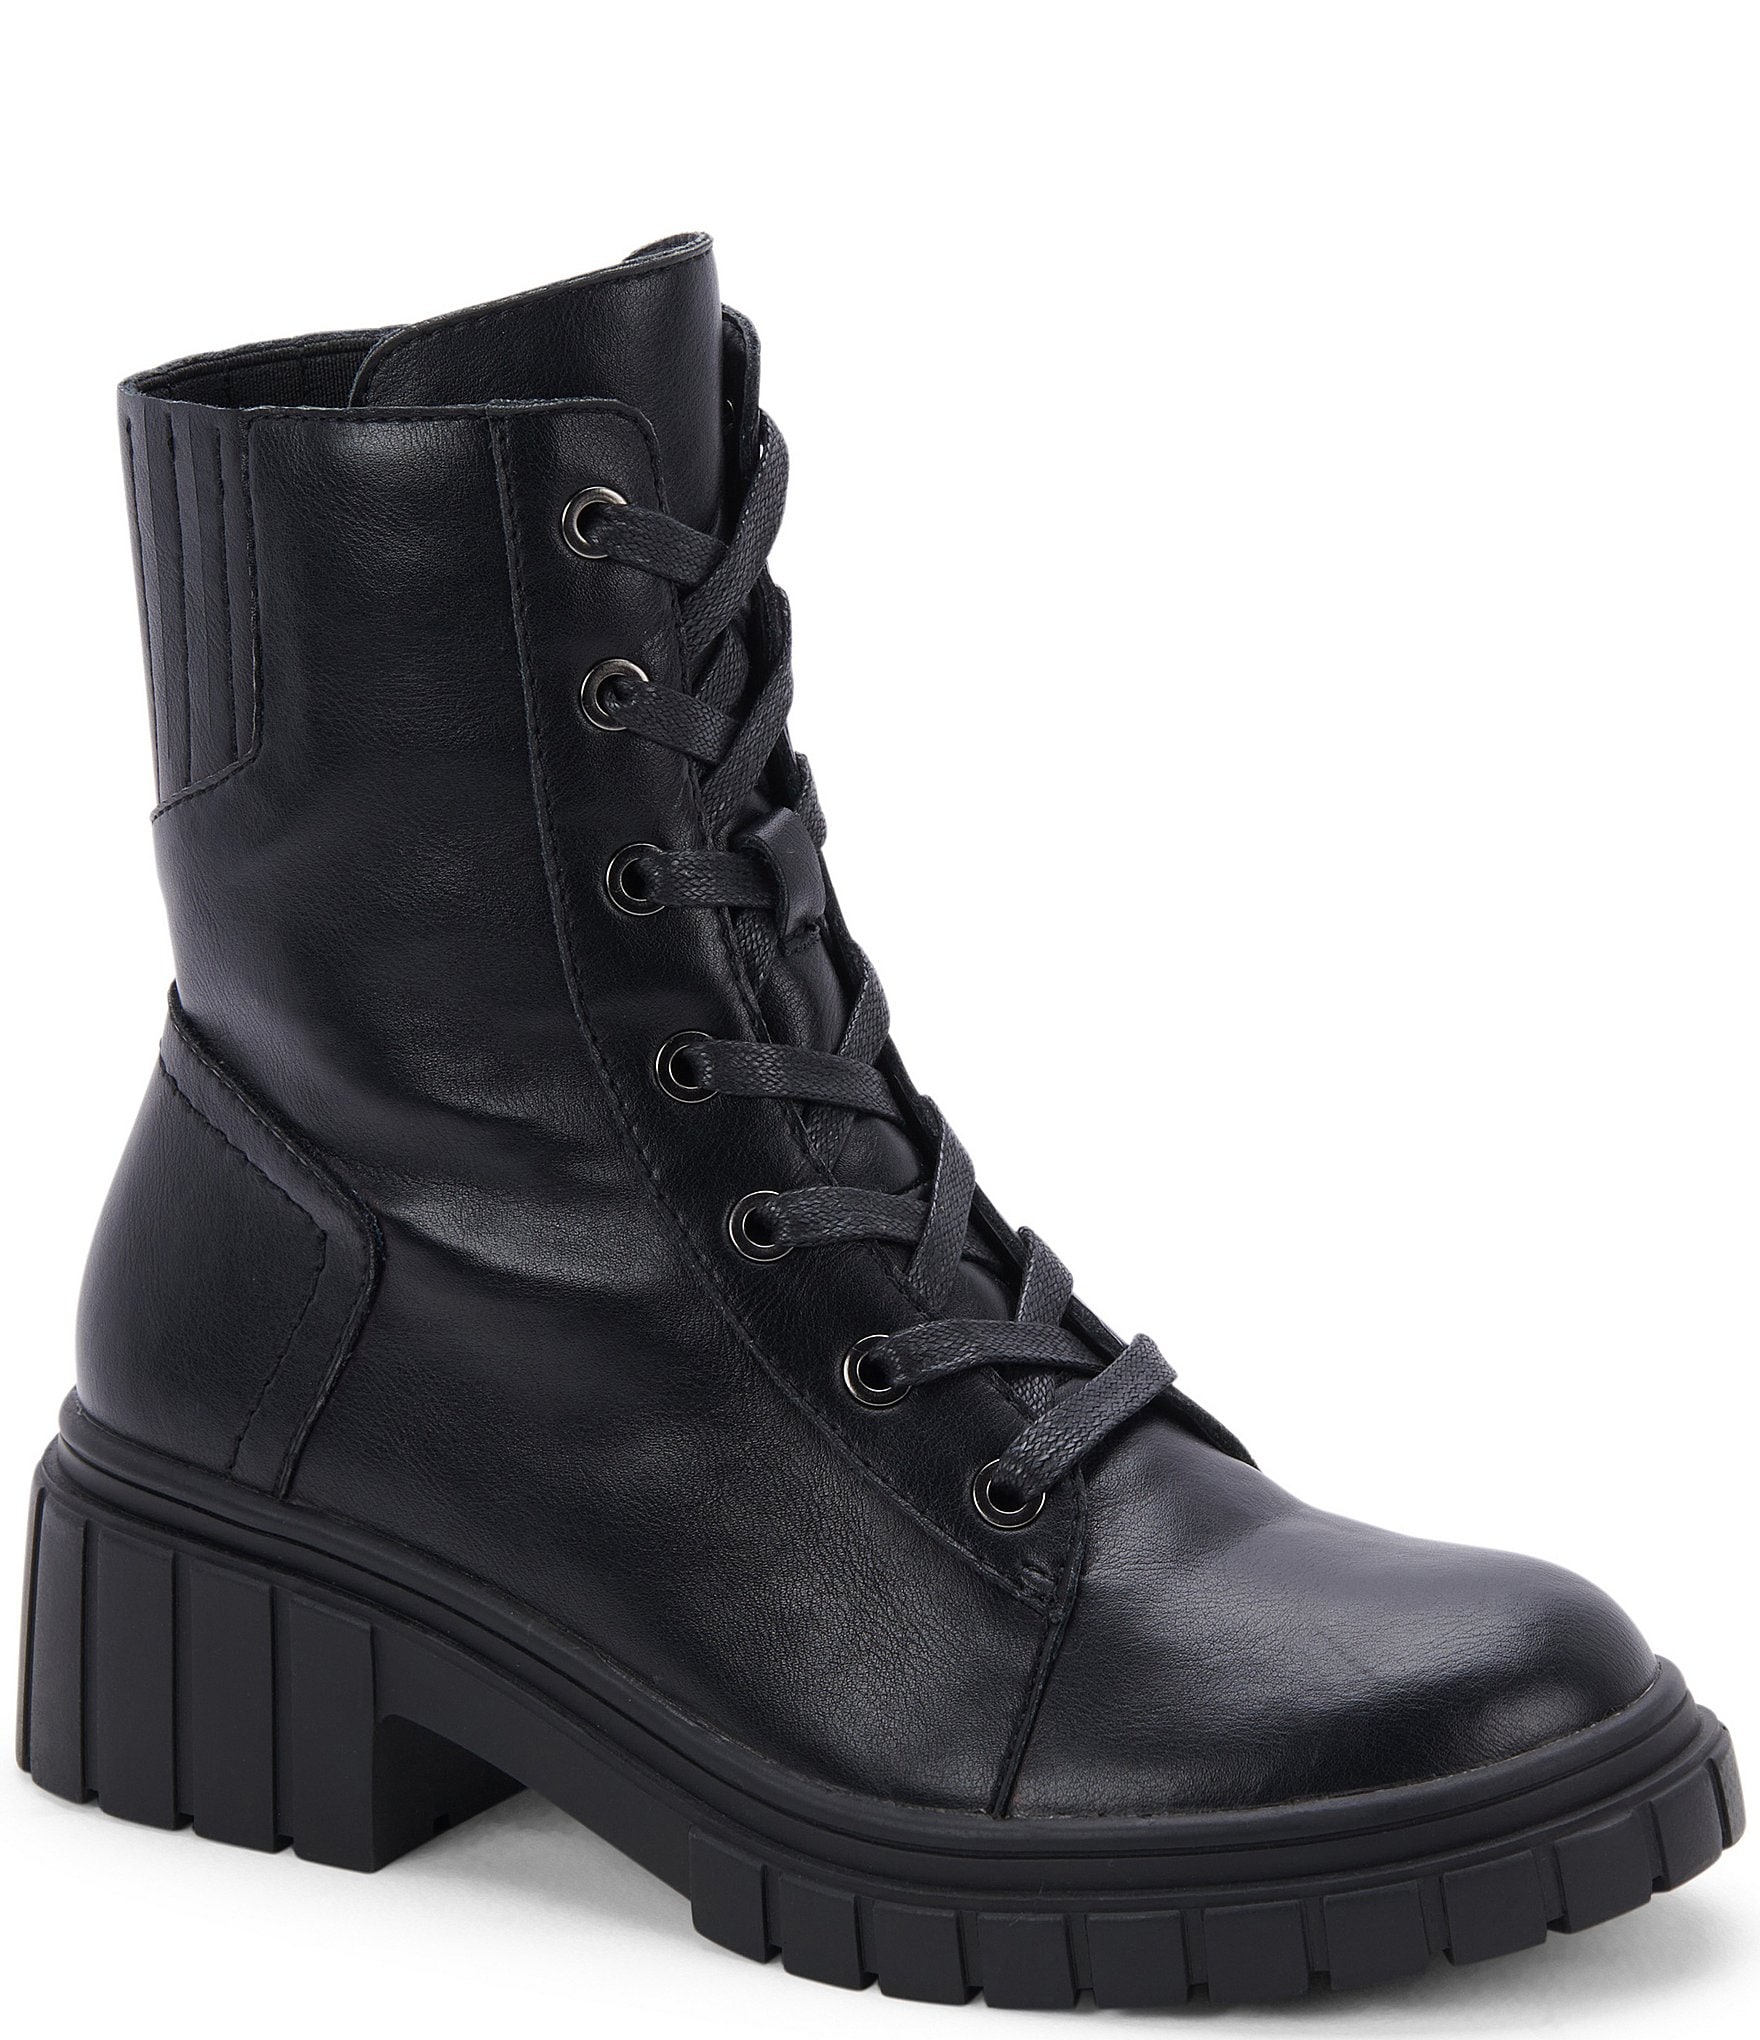 Blondo Promise Waterproof Leather Lace-Up Booties | Dillard's